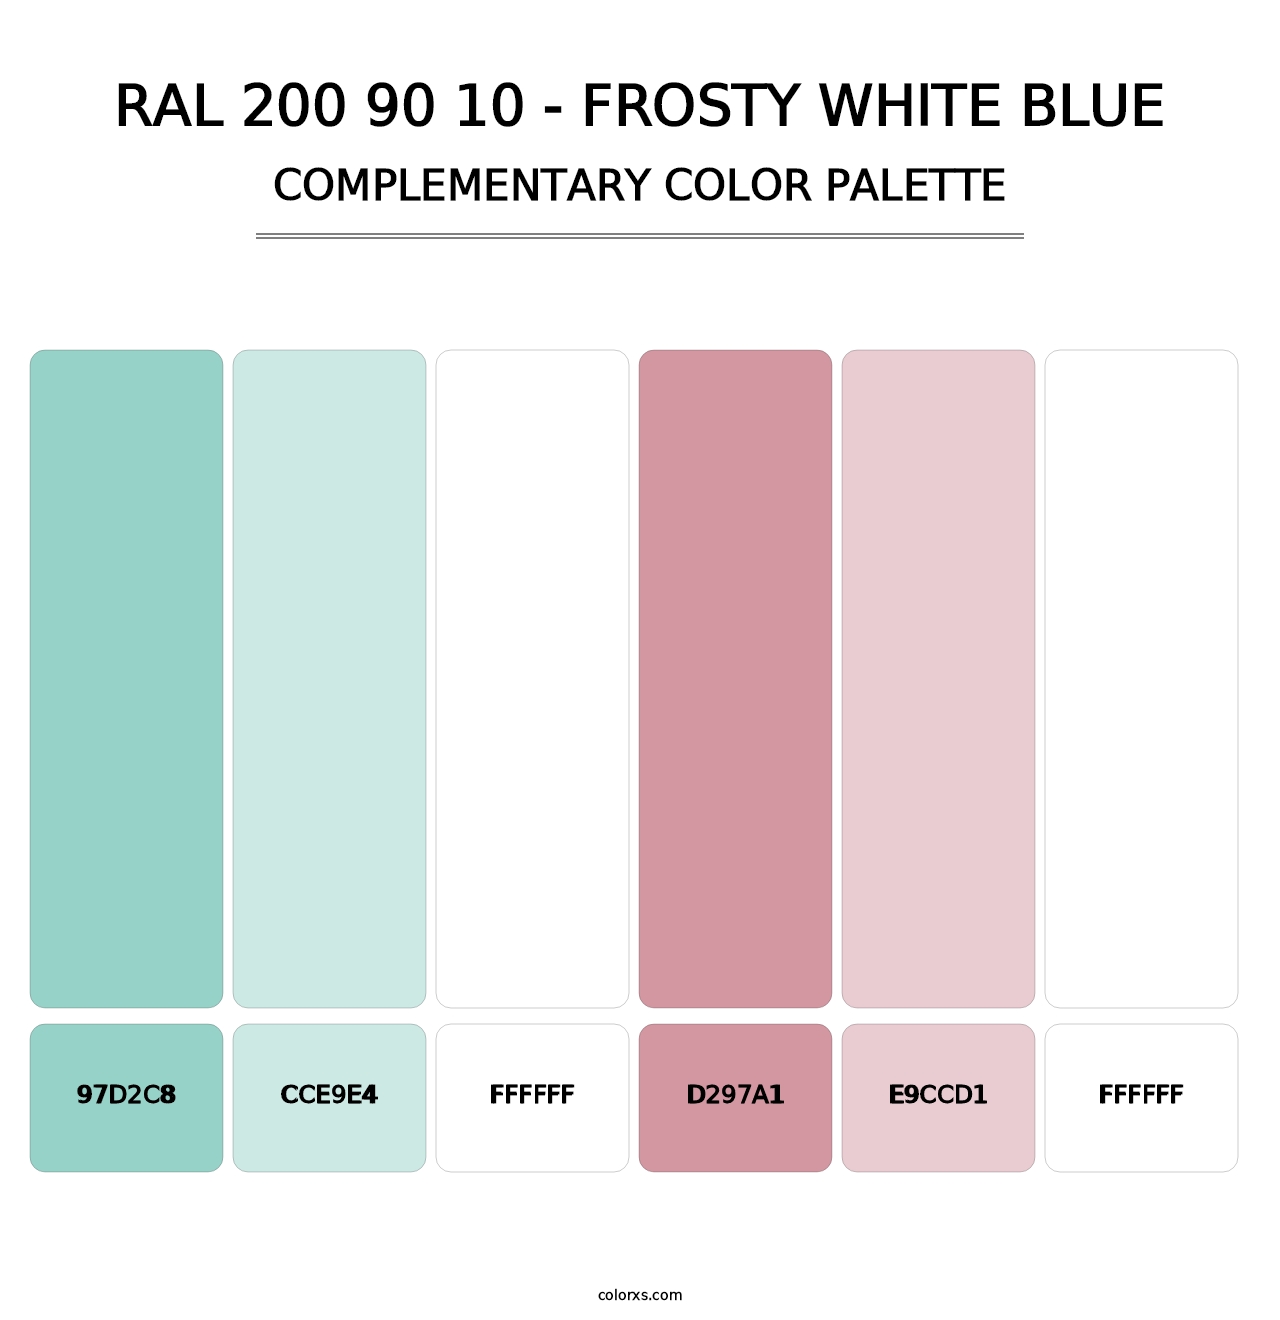 RAL 200 90 10 - Frosty White Blue - Complementary Color Palette